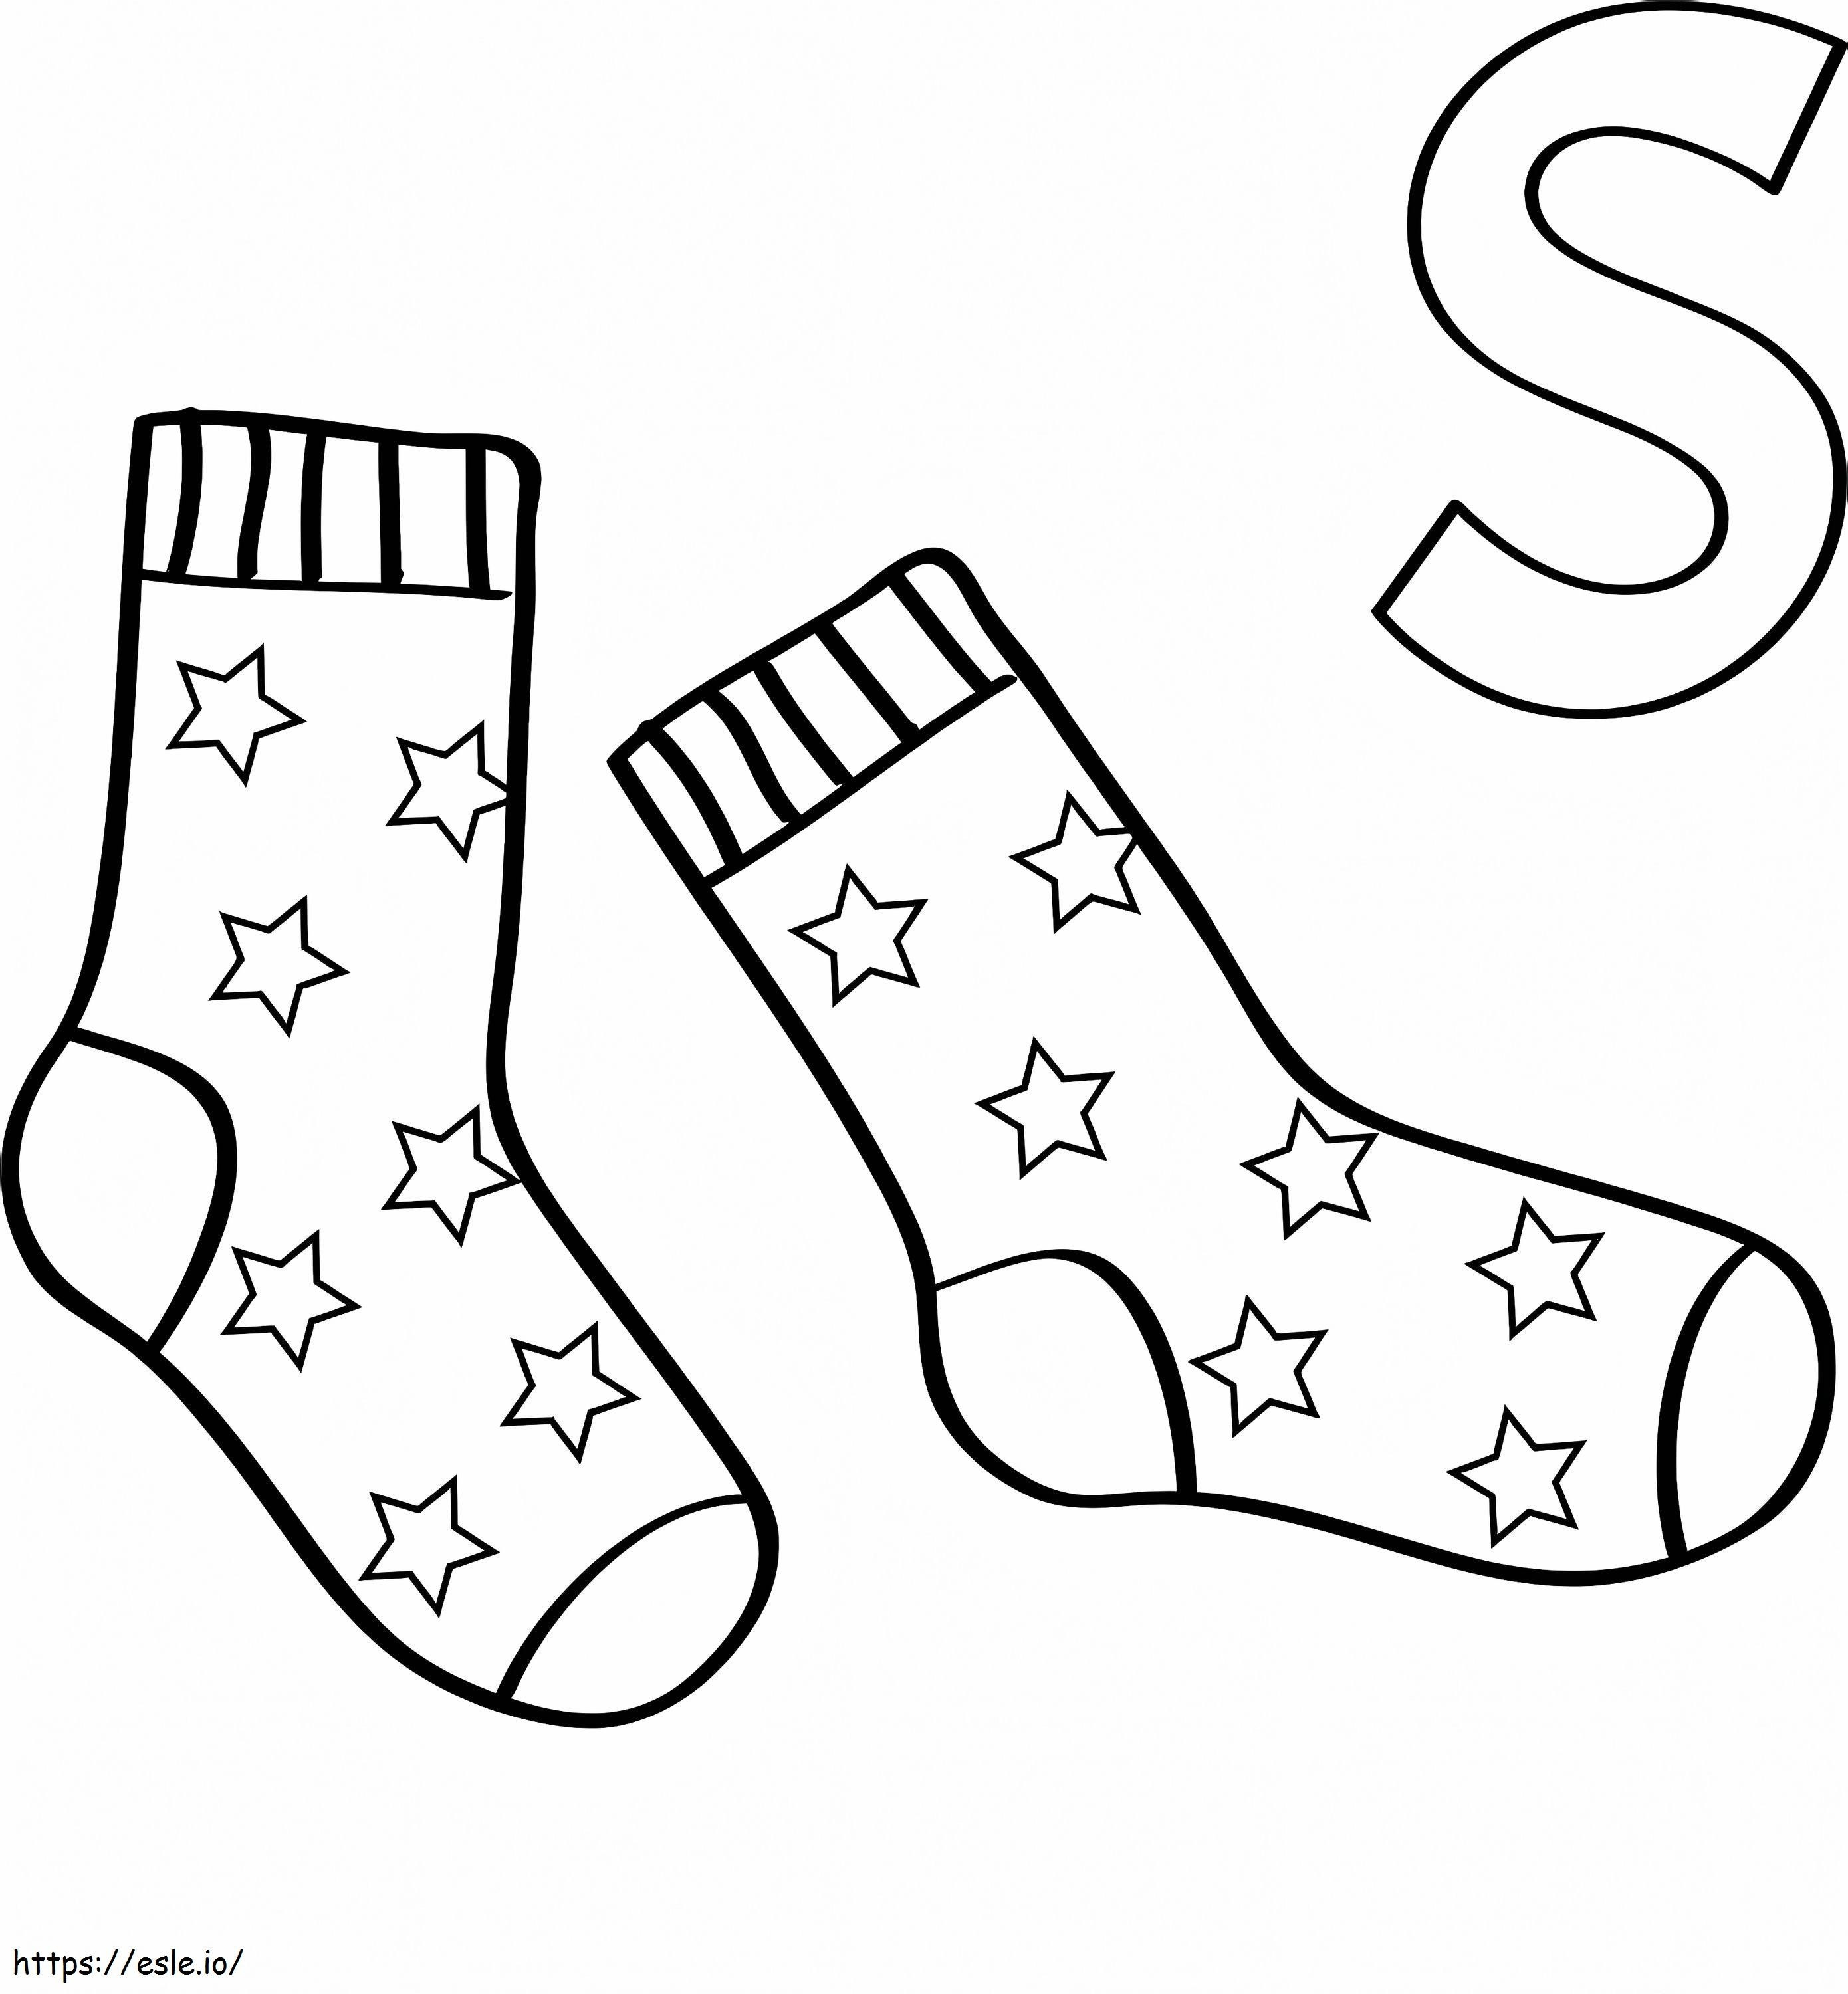 Socks And Letter S coloring page